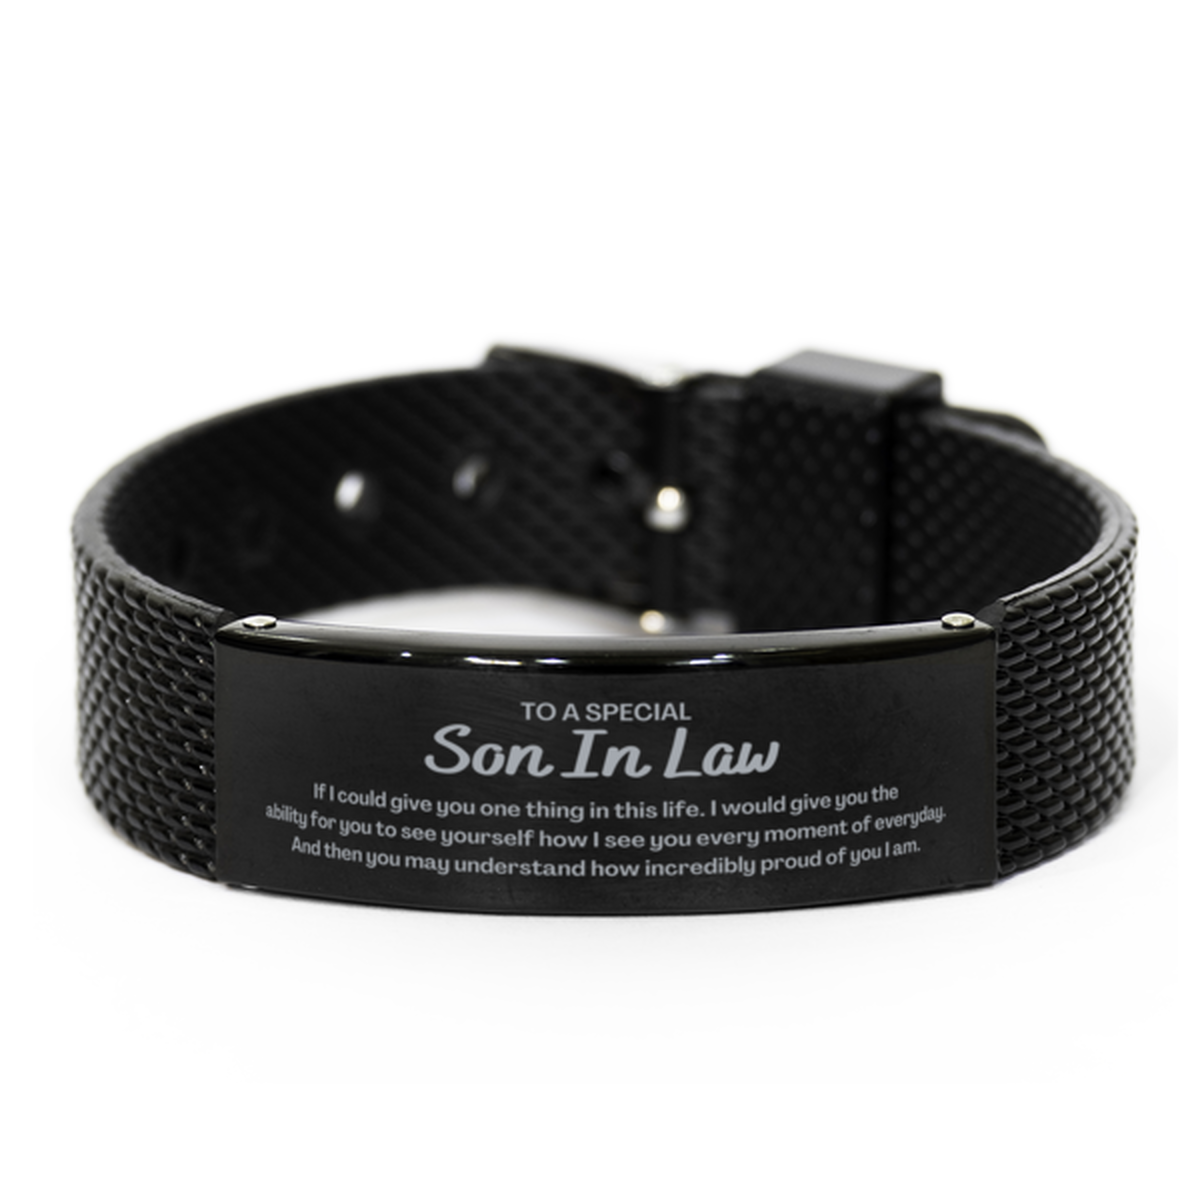 To My Son In Law Black Shark Mesh Bracelet, Gifts For Son In Law Engraved, Inspirational Gifts for Christmas Birthday, Epic Gifts for Son In Law To A Special Son In Law how incredibly proud of you I am